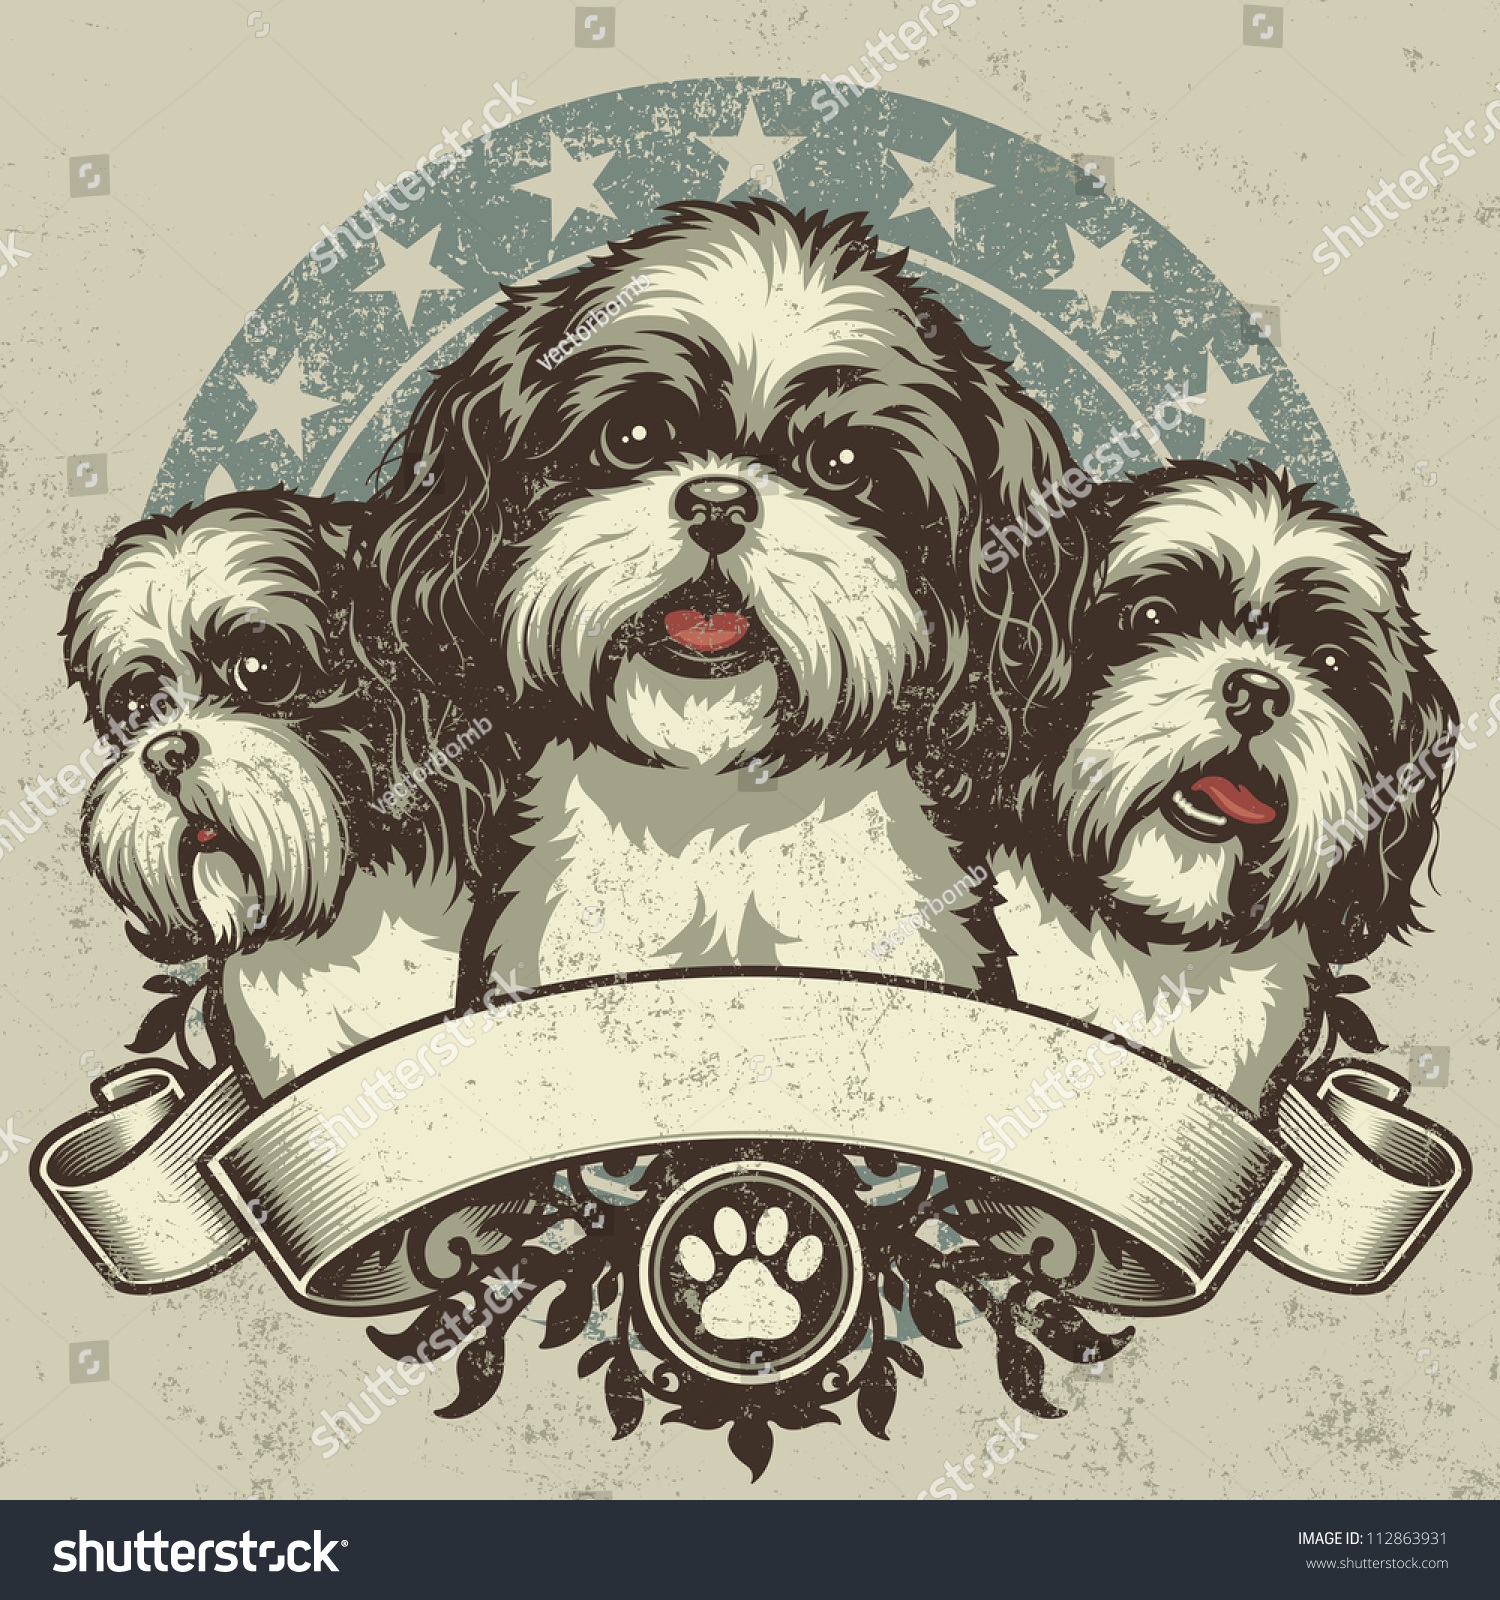 SVG of Shih Tzu Crest Design. Vector illustration of three purebred Shih Tzu dogs (front and profile view) sitting proudly over a grunge banner and floral design elements. svg